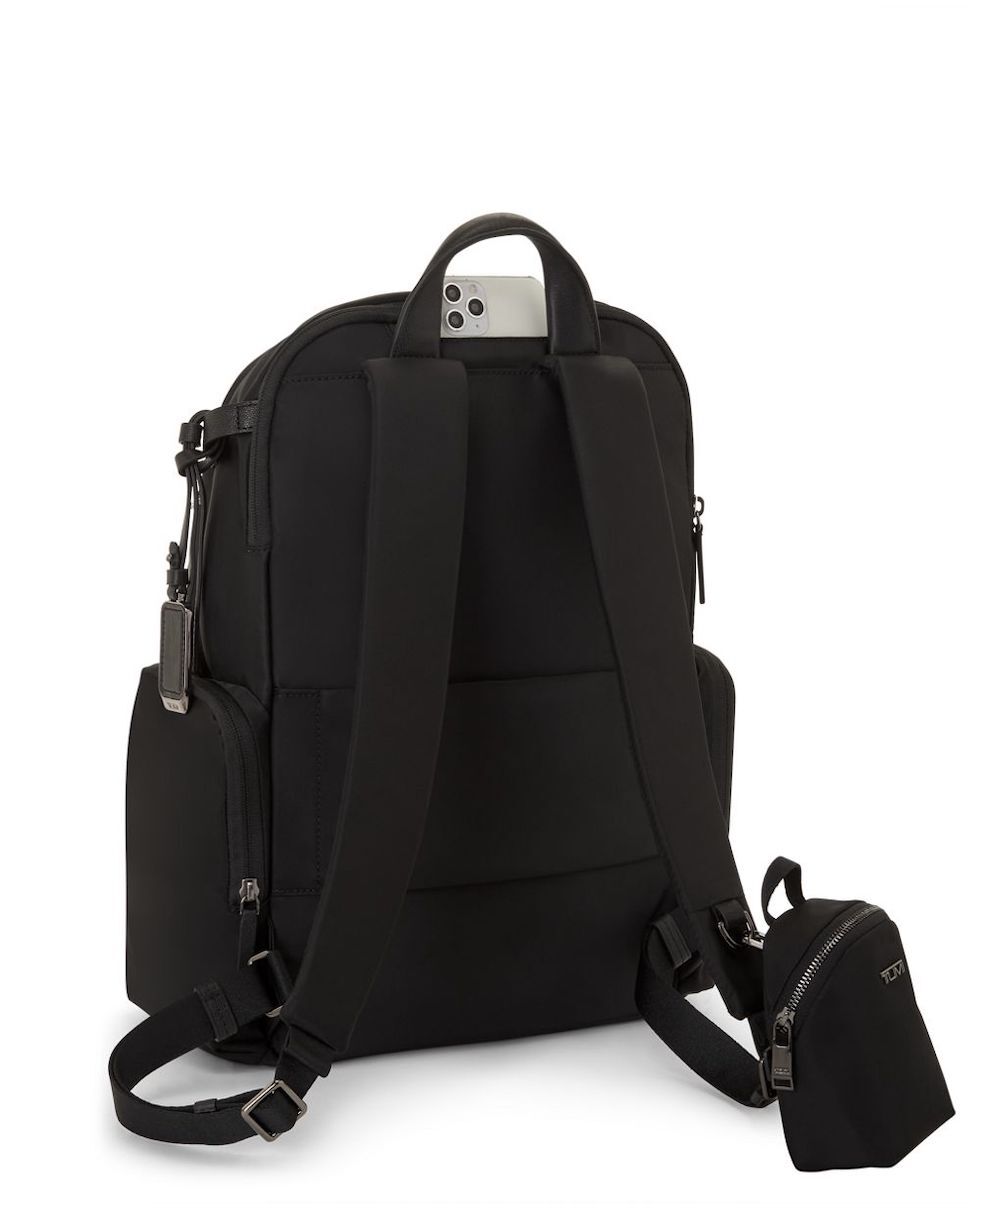 Best Business Travel Backpack Options on the Market